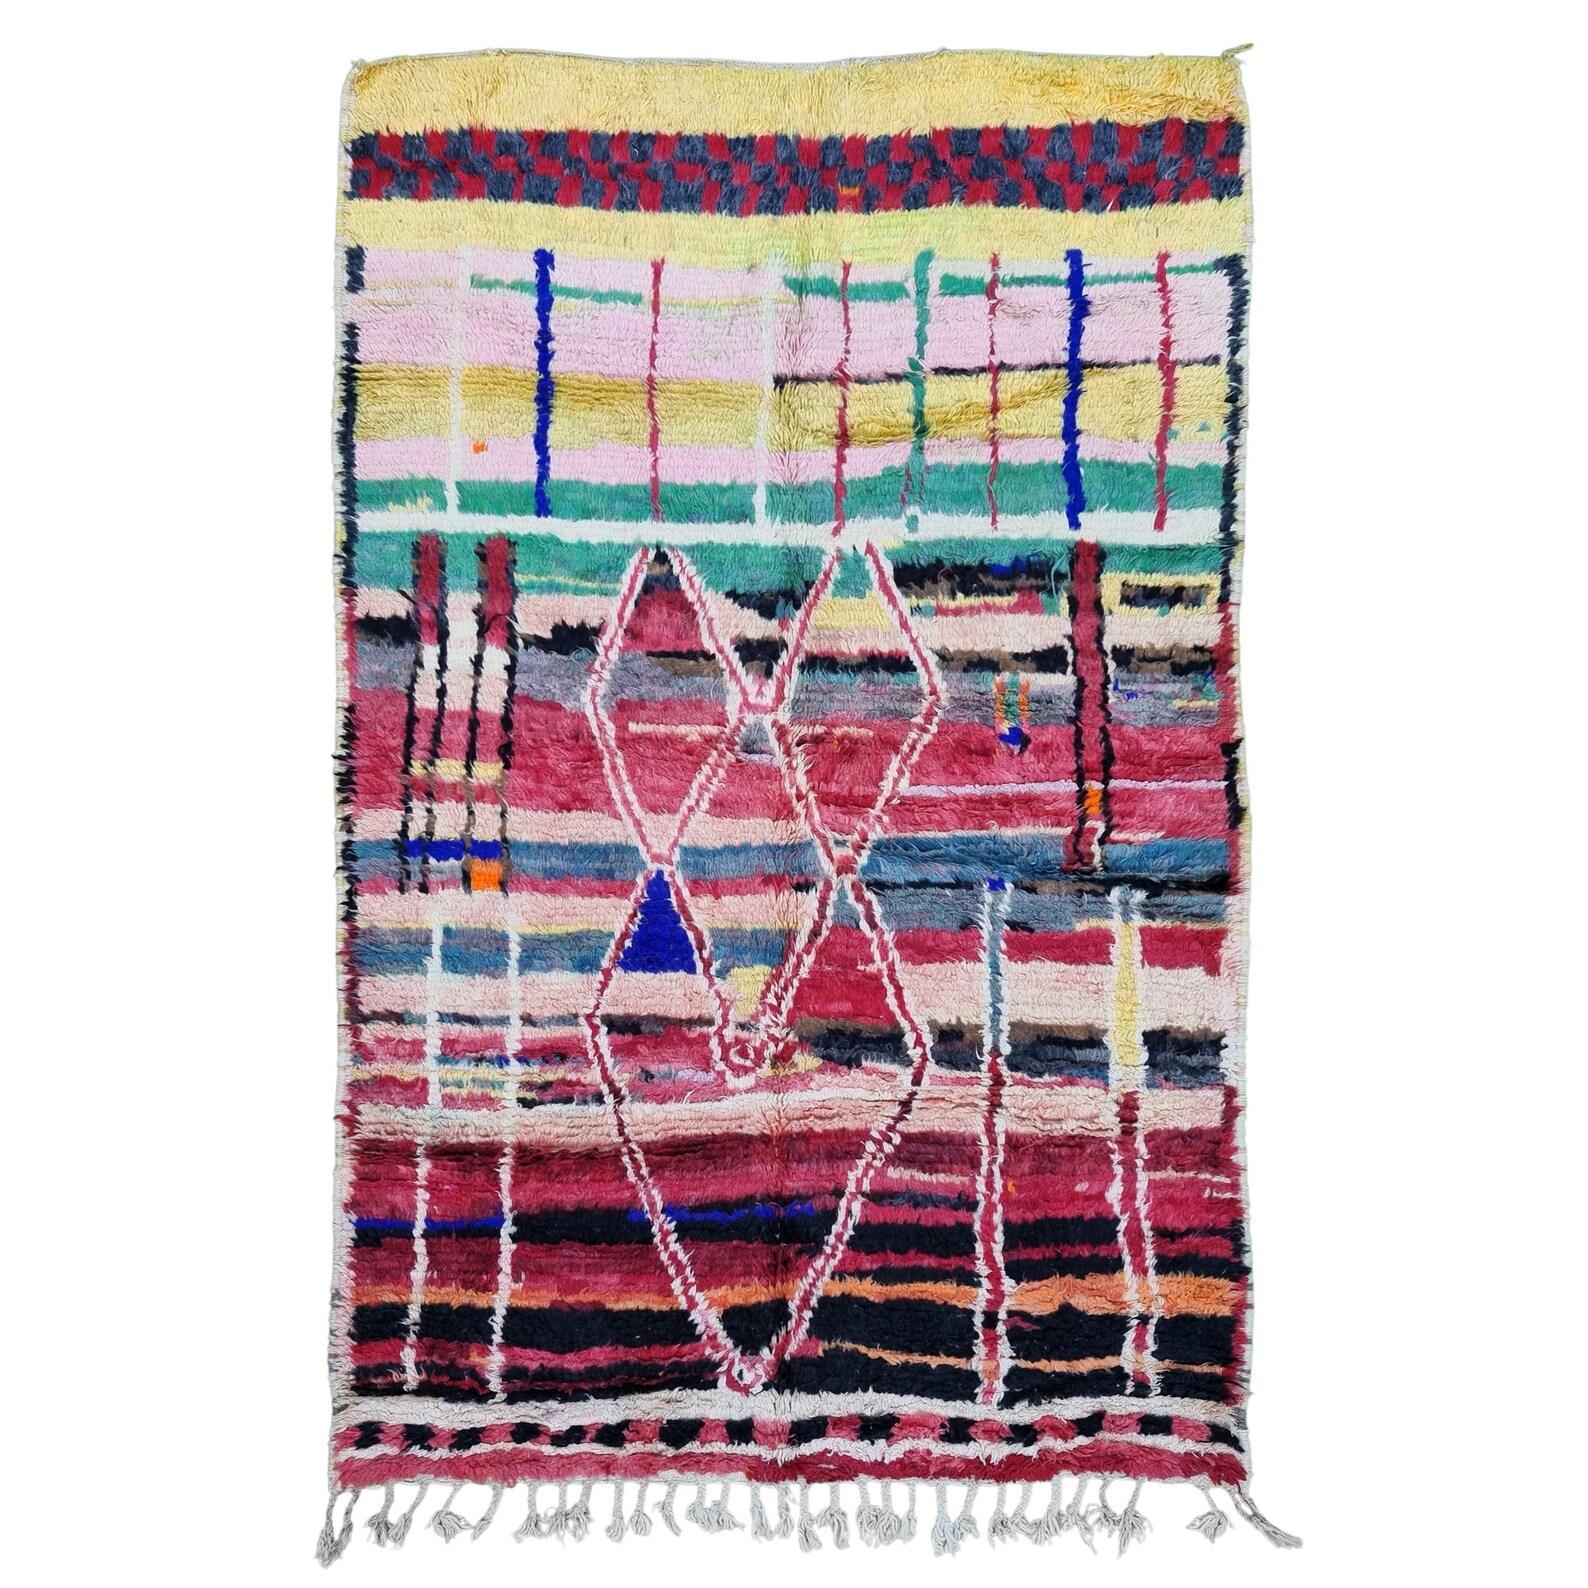 Moroccan Boujaad multi-colored striped rug handwoven out of natural and soft sheep wool featuring bright red, pinks, mauve, red, orange, or beige background, along with irregular geometric patterns blending Arabic and Berber cultures in Morocco. The